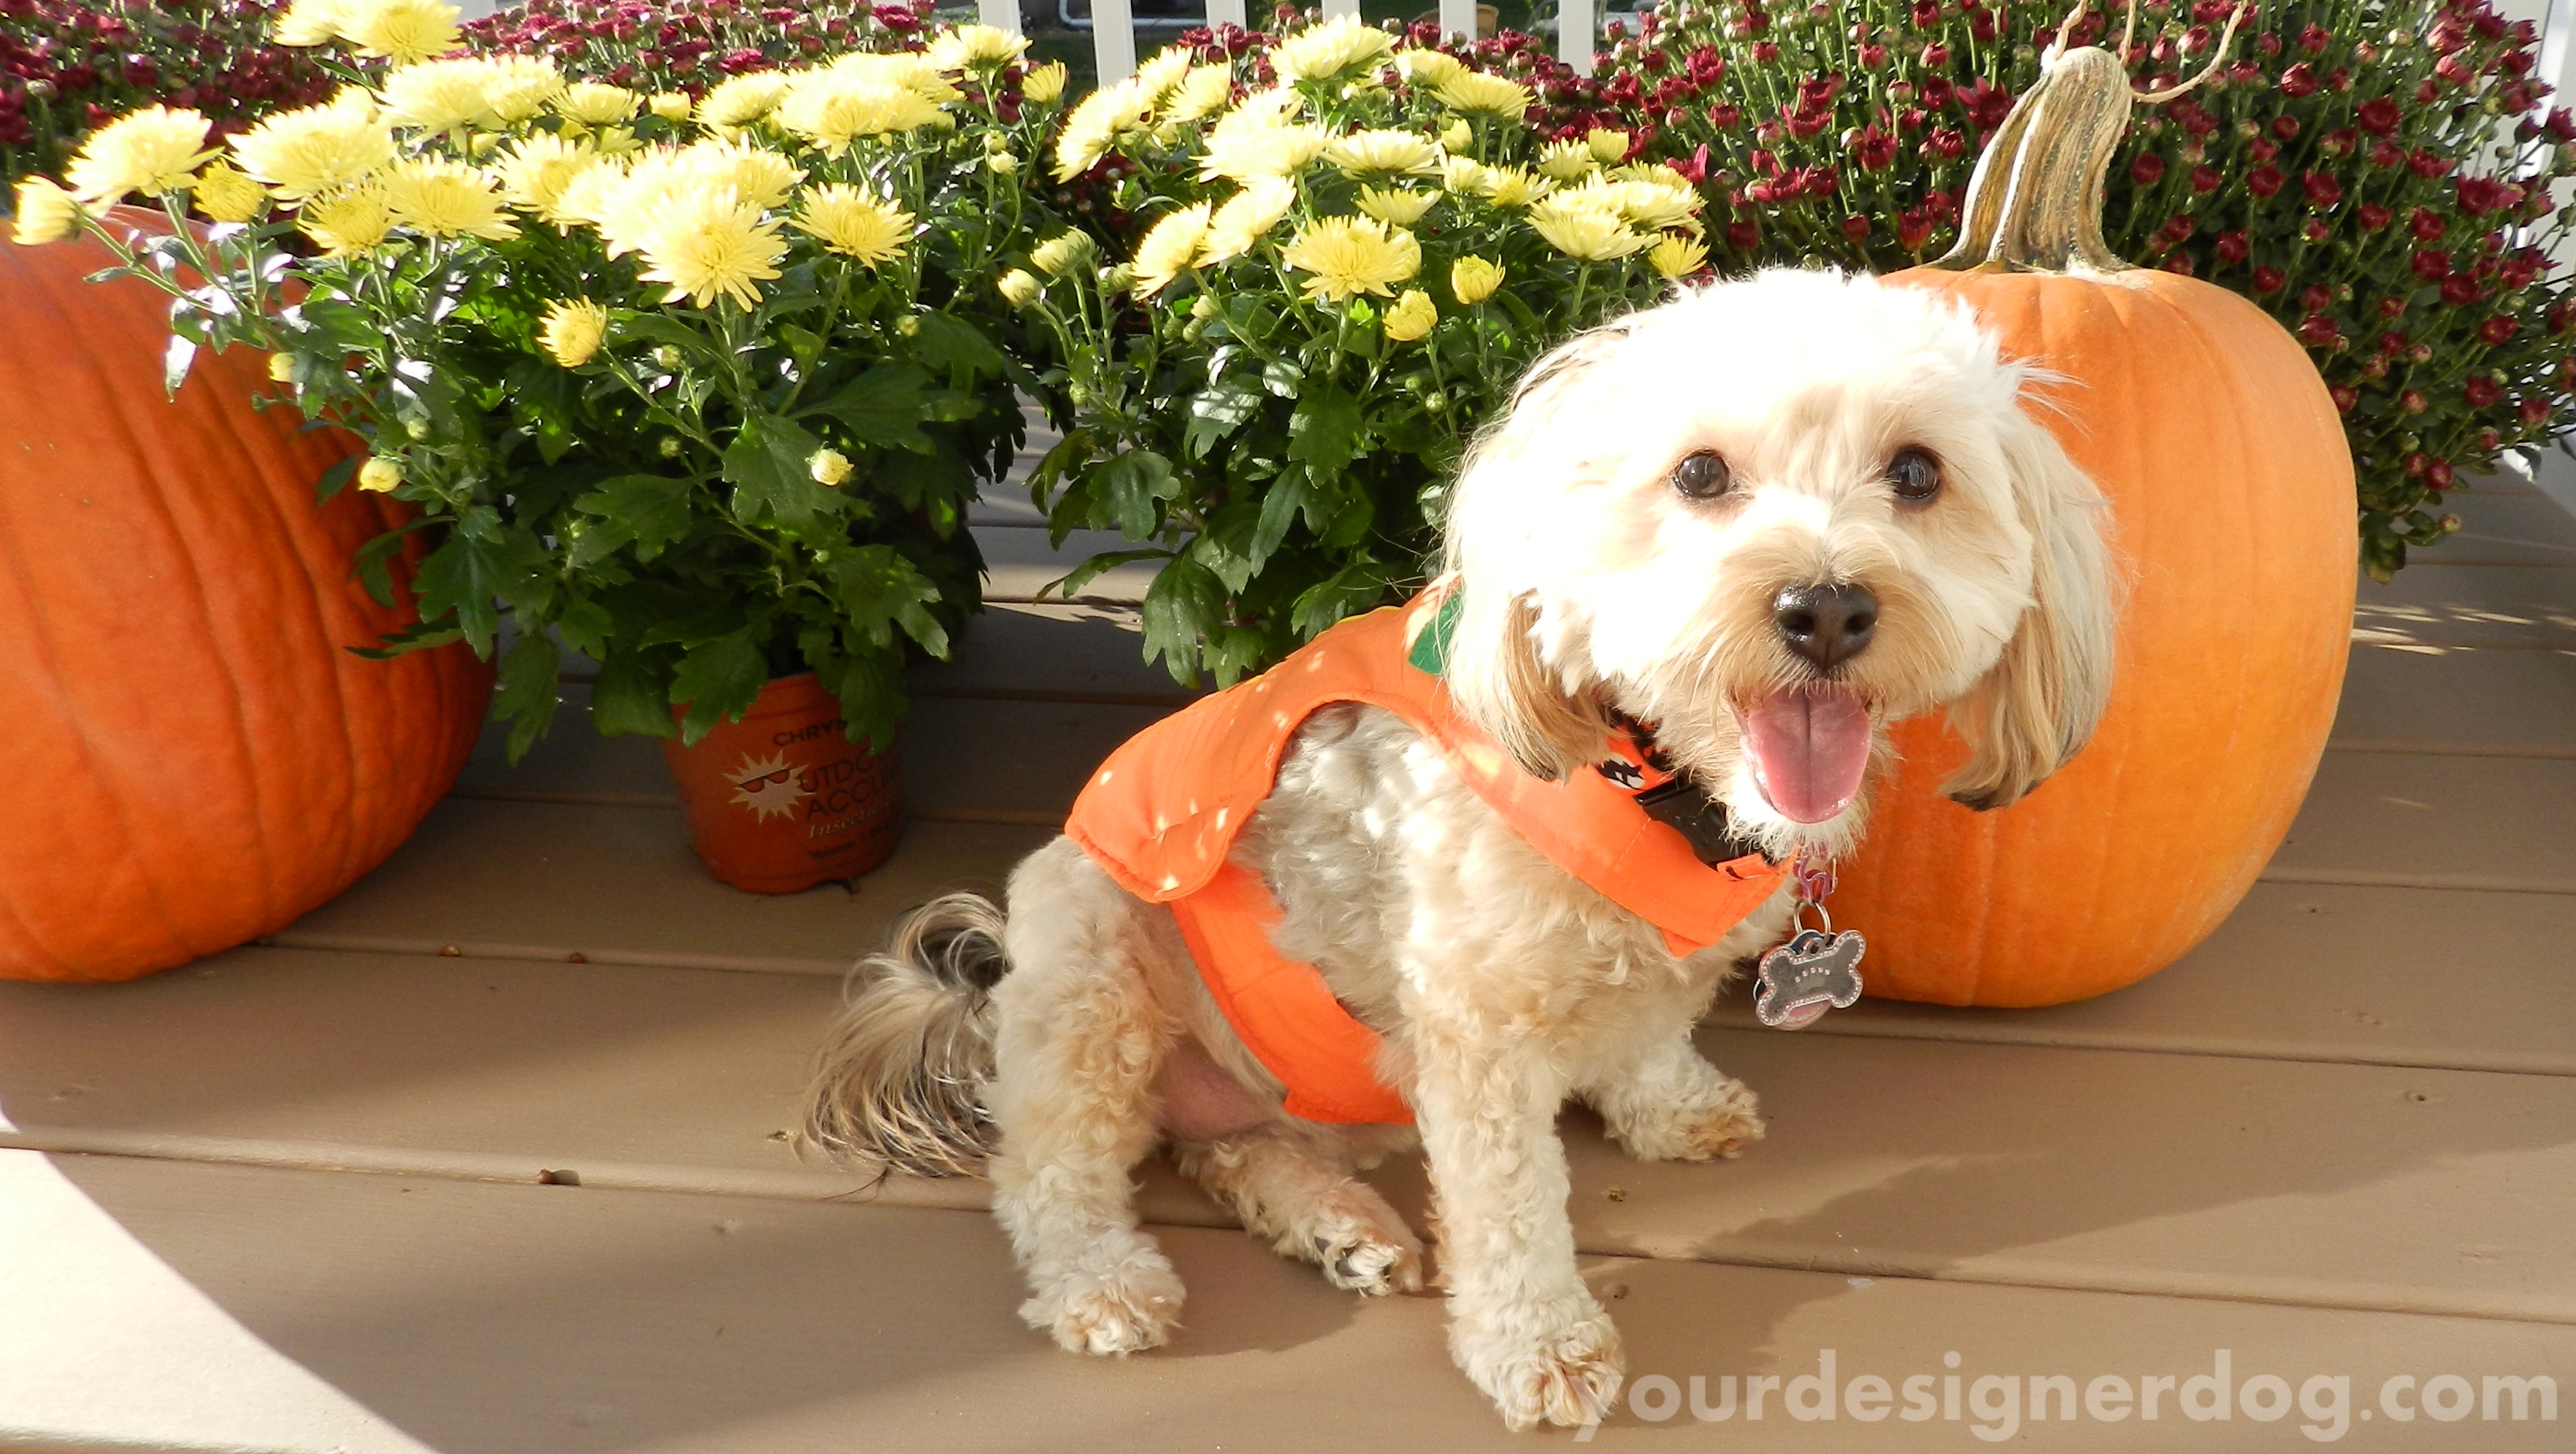 dogs, designer dogs, yorkipoo, yorkie poo, pumpkins, fall, halloween, mums, dogs with flowers, dogs smiling